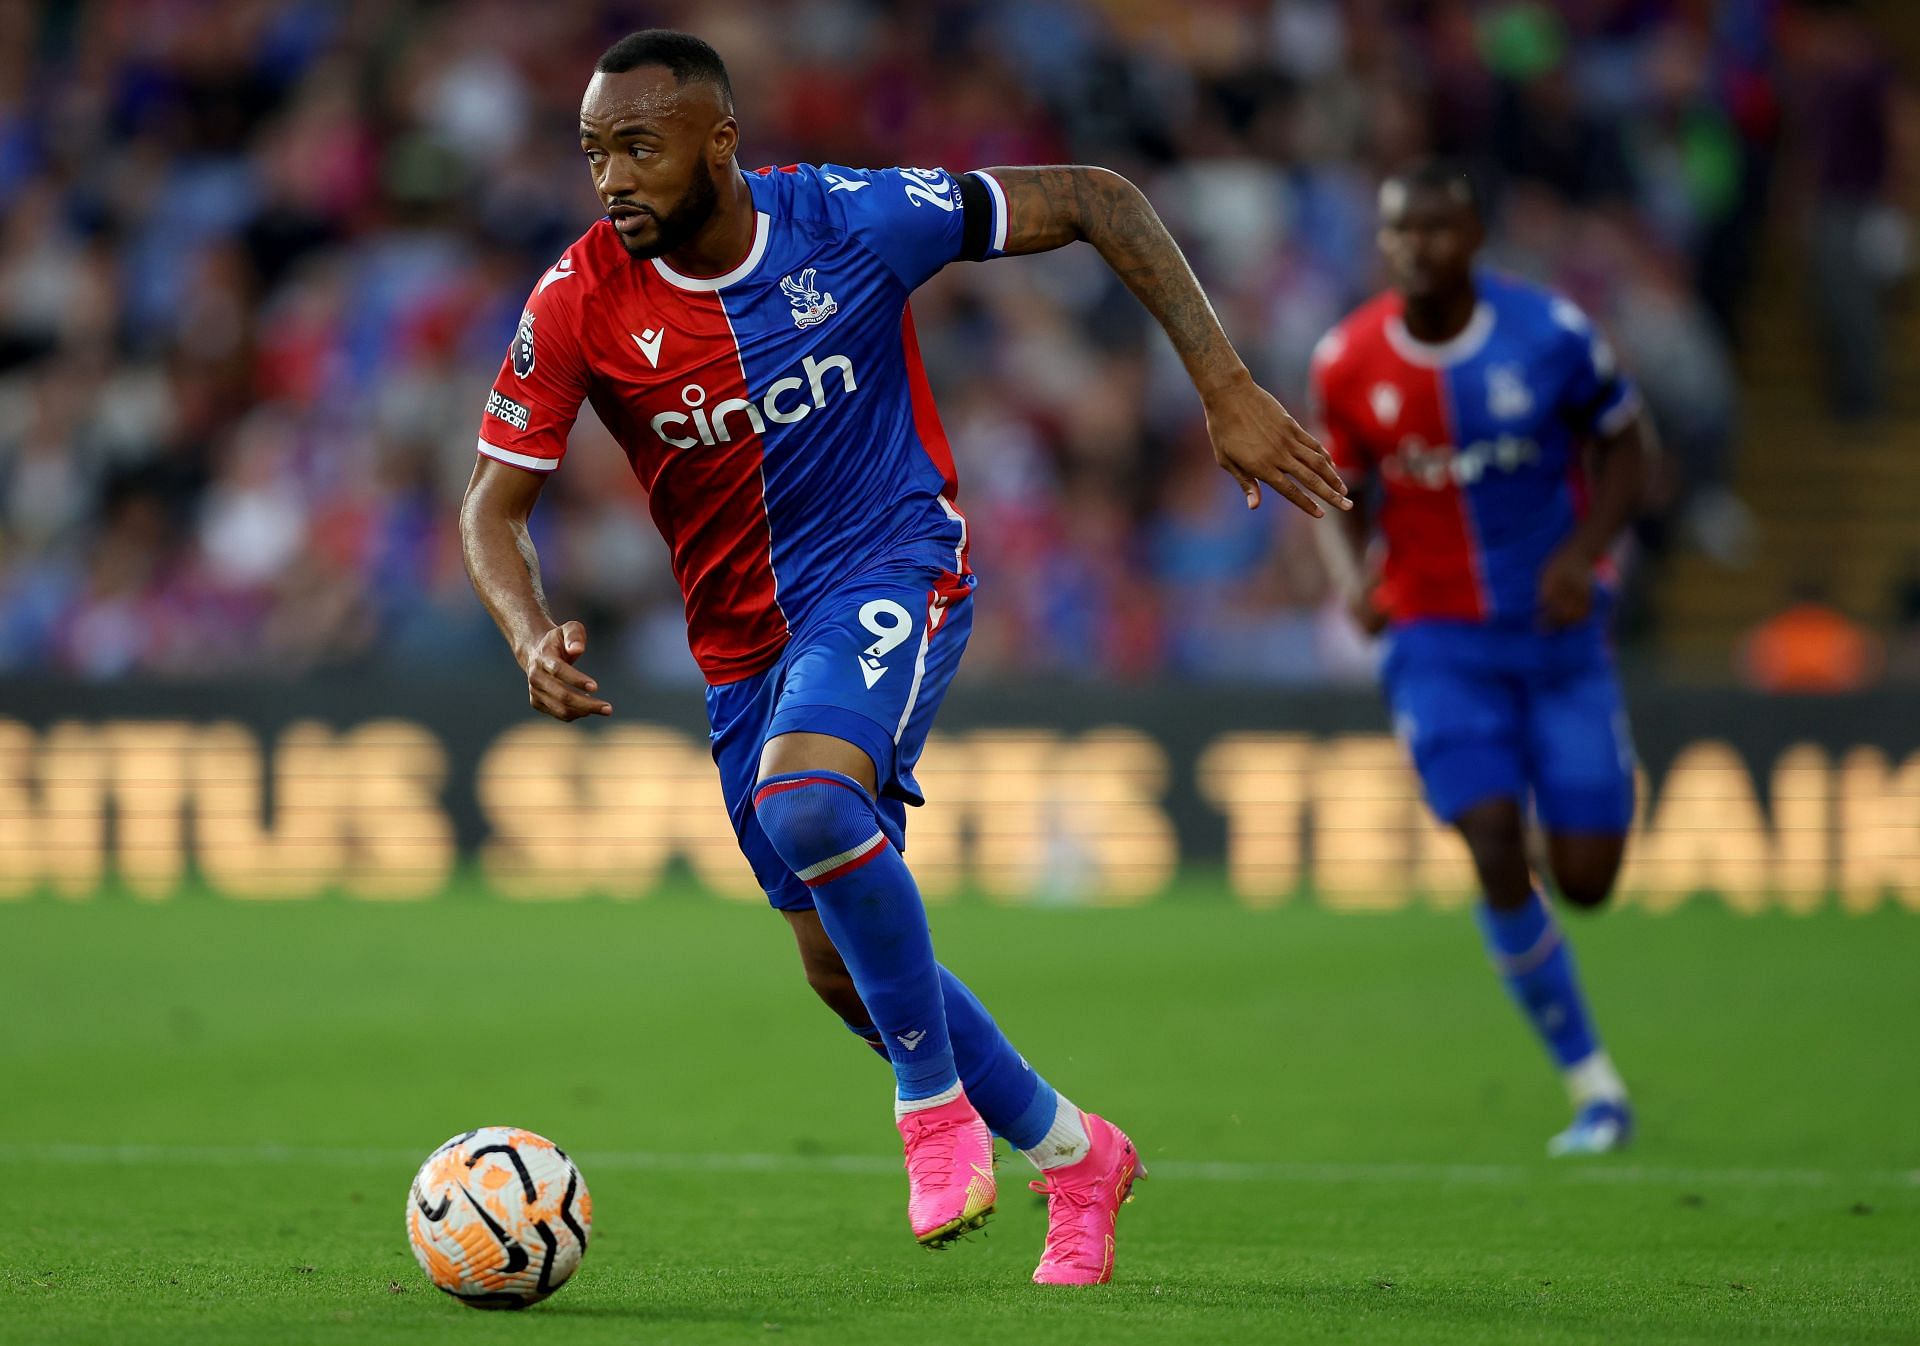 Crystal Palace take on Newcastle United this weekend